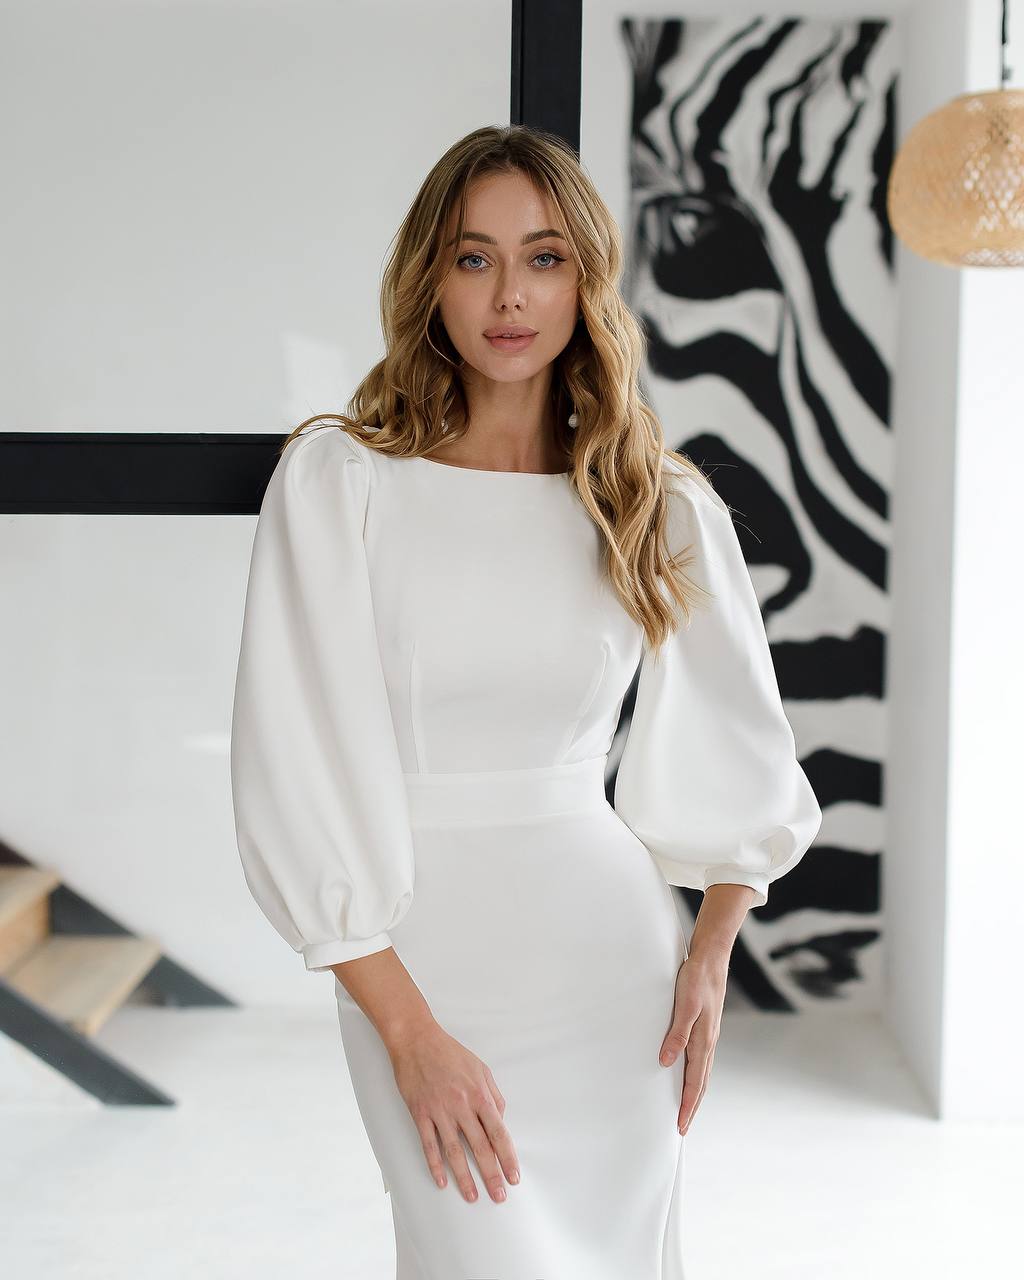 Elegant Backless Midi Dress with Long Puff Sleeves